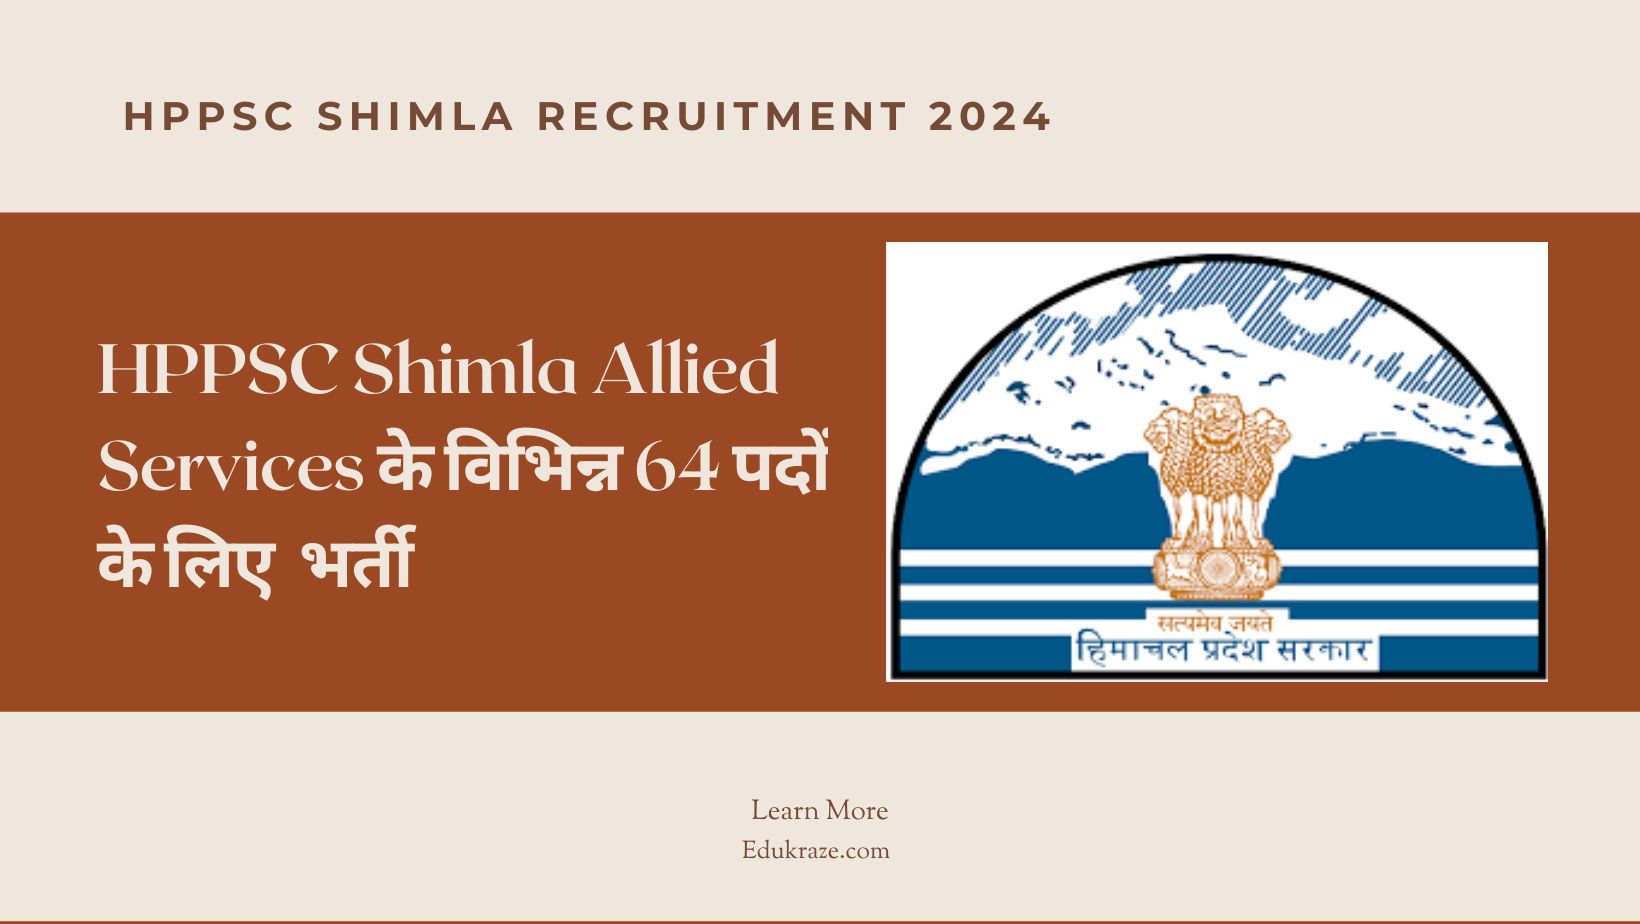 HPPSC Shimla Allied Services Recruitment 2024 Out for 64 Posts